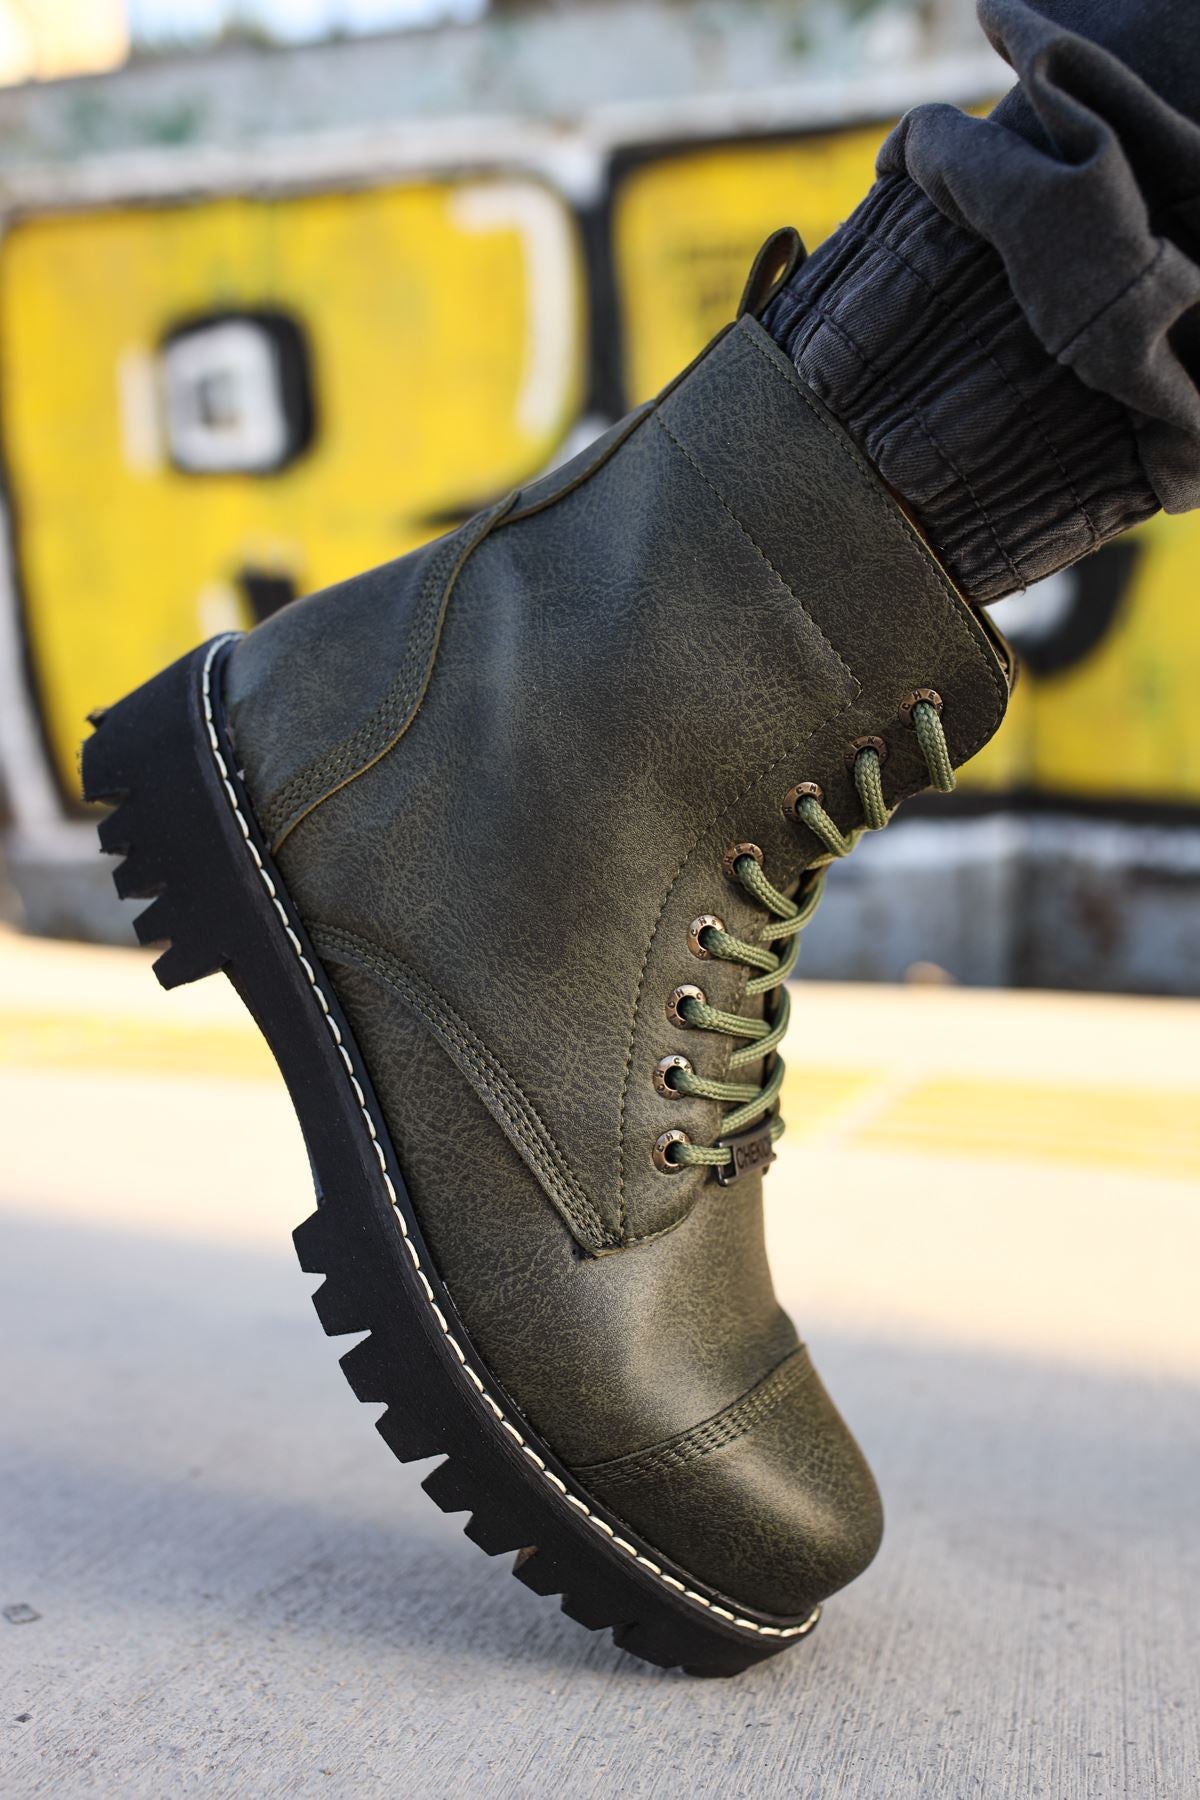 CH009 Men's Leather Khaki-Black Sole Casual Winter Boots - STREETMODE ™